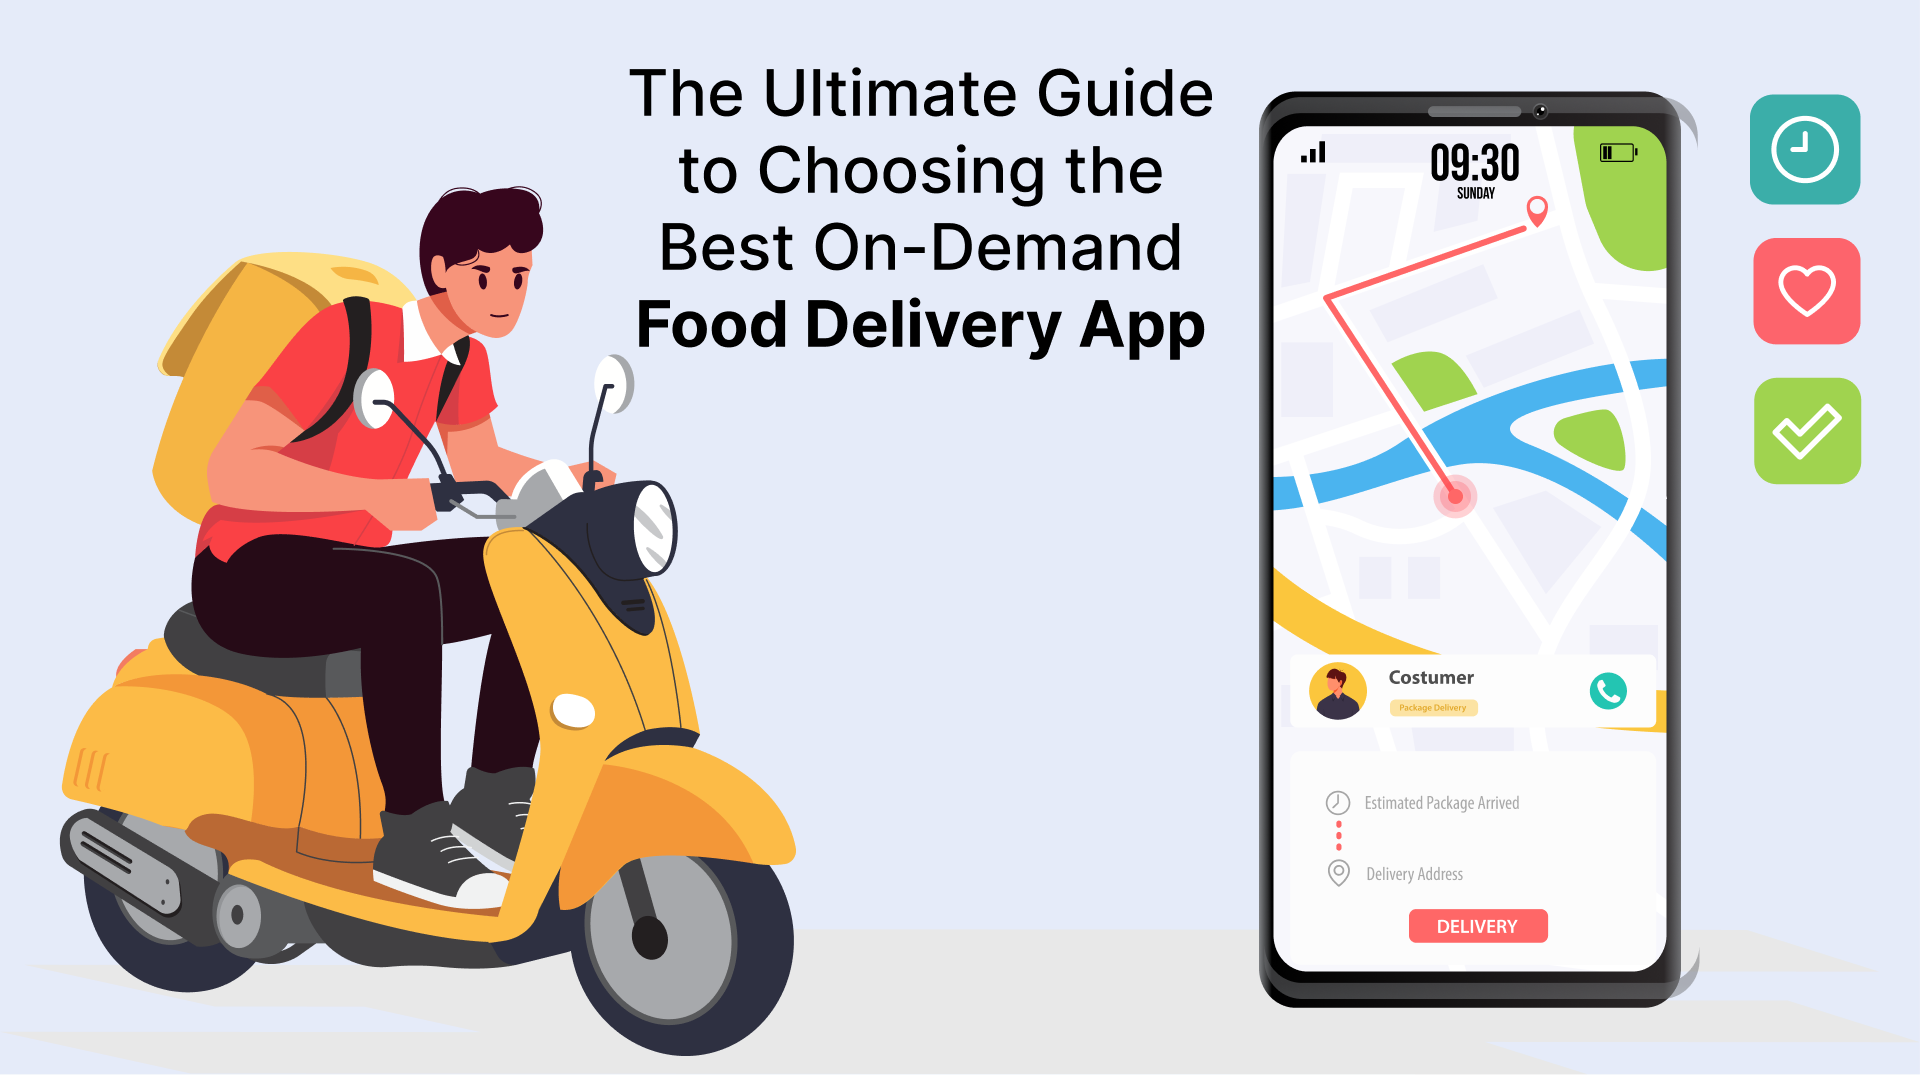 The Ultimate Guide to Choosing the Best On-Demand Food Delivery App